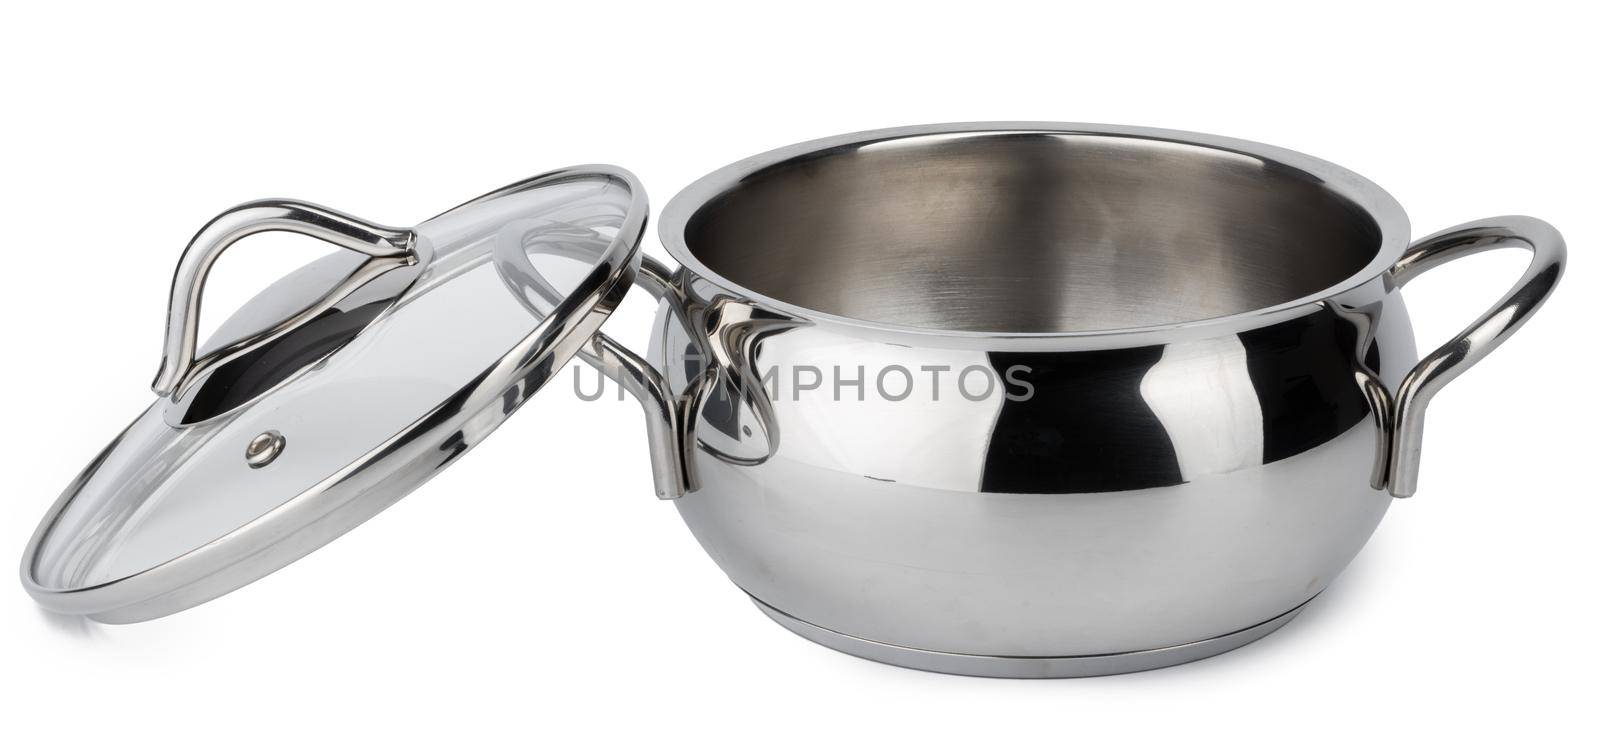 New metal cooking pot isolated on white by Fabrikasimf